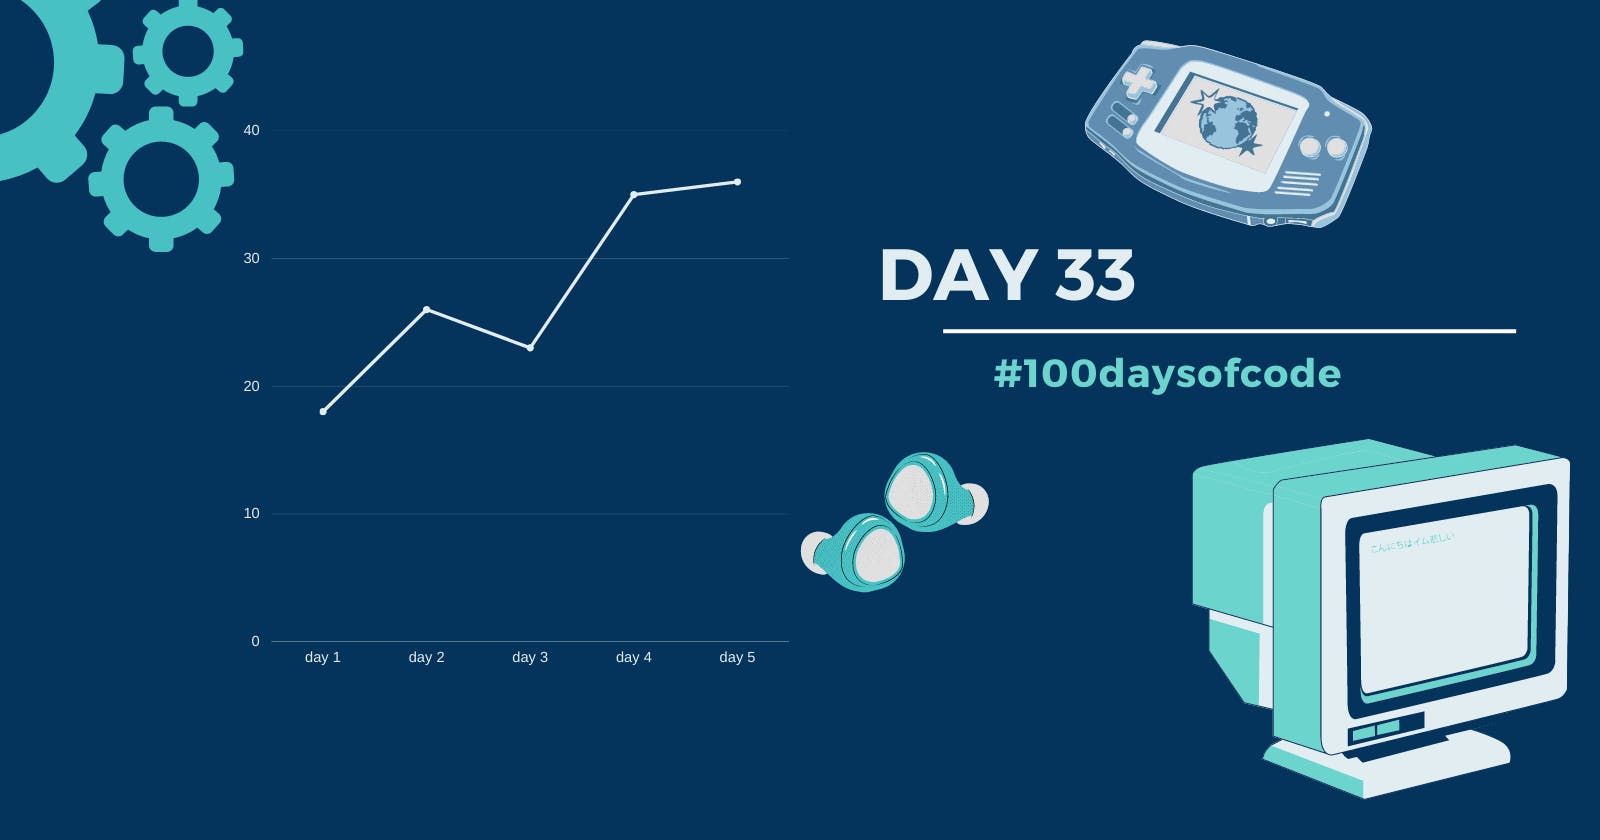 Day 33 in #100days of code challenge